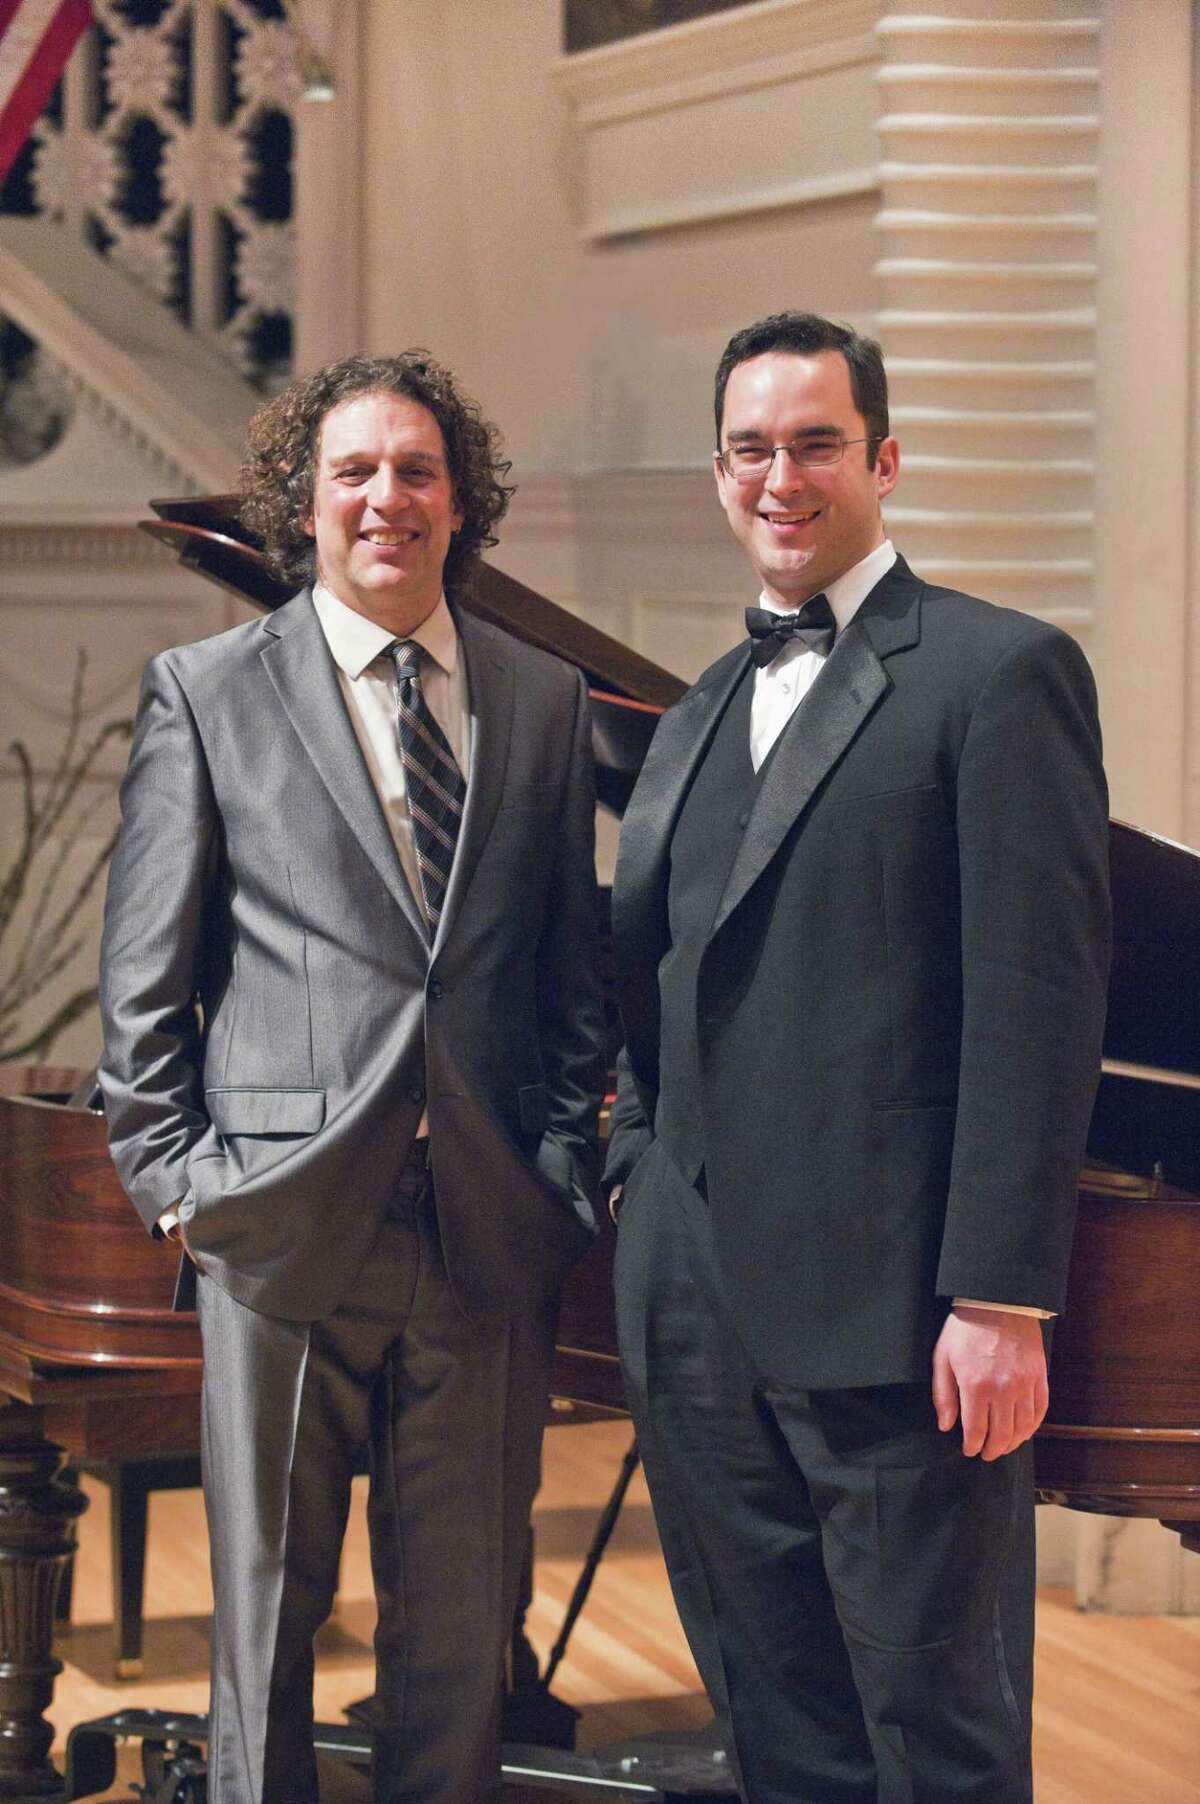 “Bernstein: A Centennial Celebration,” presented by the Fairfield County Chorale, takes place March 10 in Norwalk. FCC artistic director David Rosenmeyer, left, and assistant conductor Michael Sheetz will be on the podium.